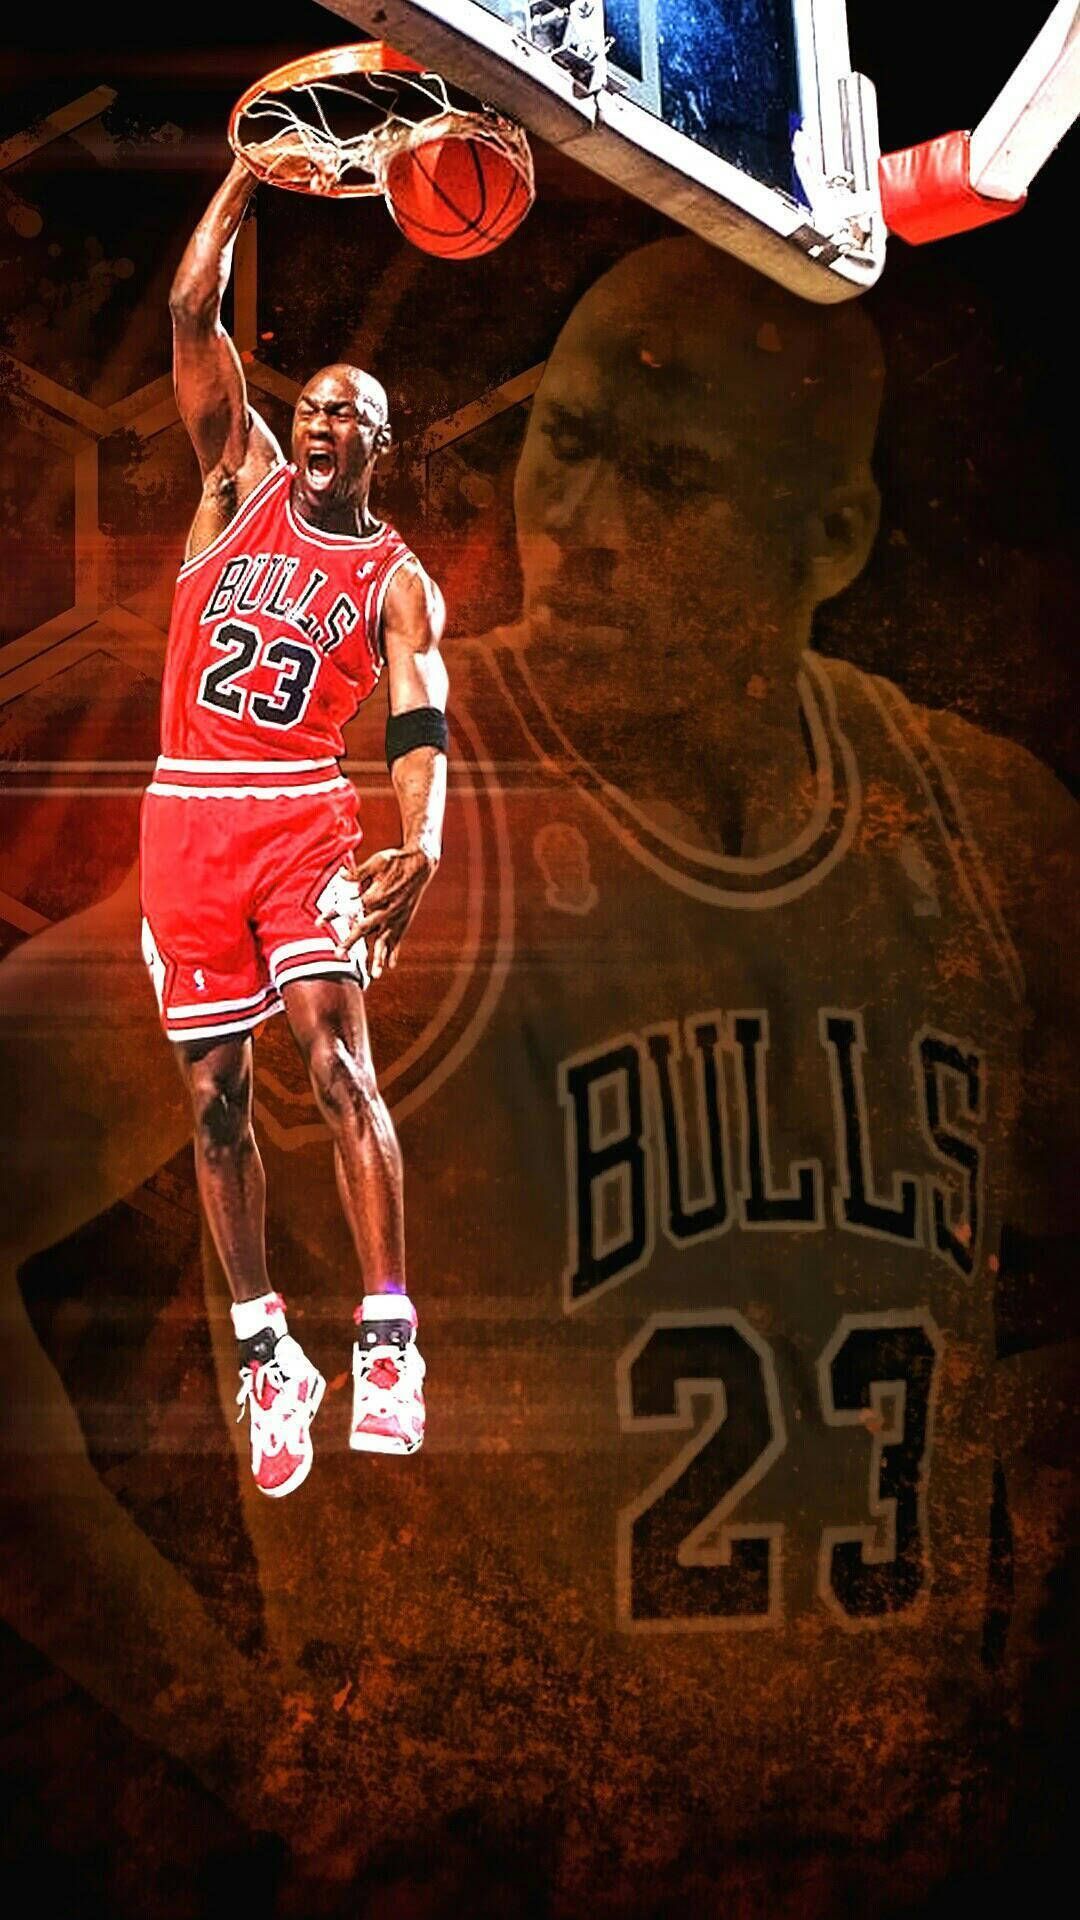 Michael Jordan wallpaper for iPhone and Android devices. You can download this wallpaper from the link below. - Michael Jordan